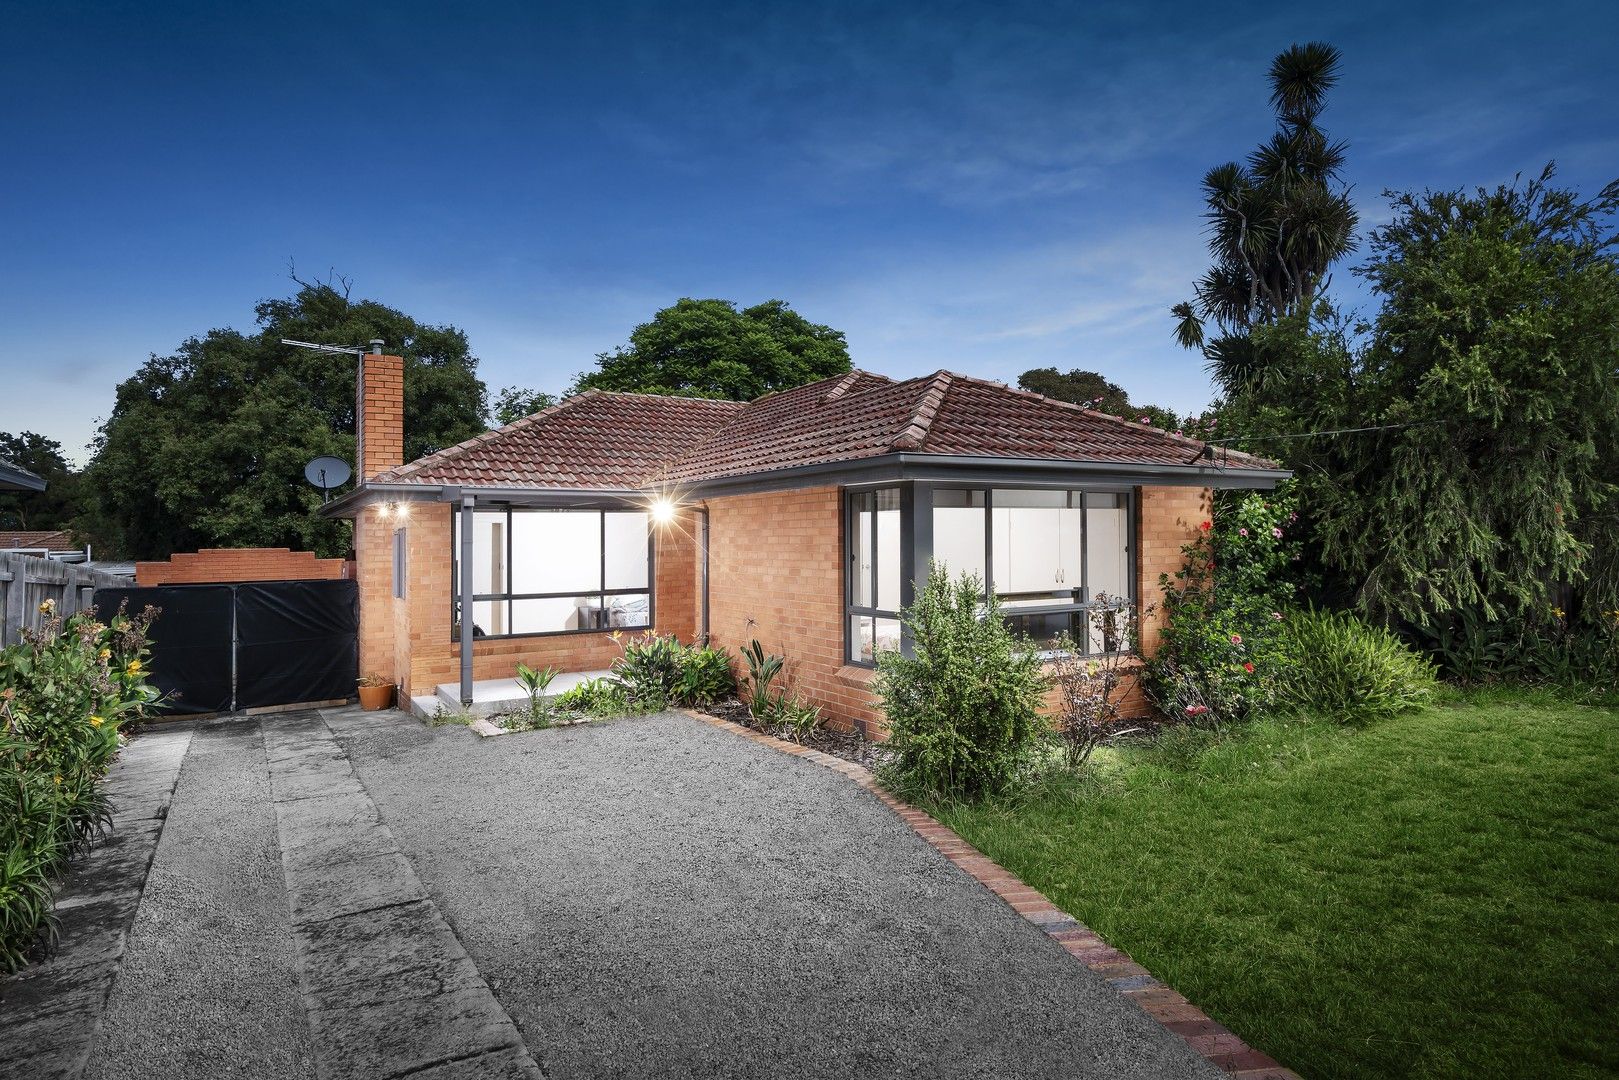 3 bedrooms House in 988 Centre Road OAKLEIGH SOUTH VIC, 3167